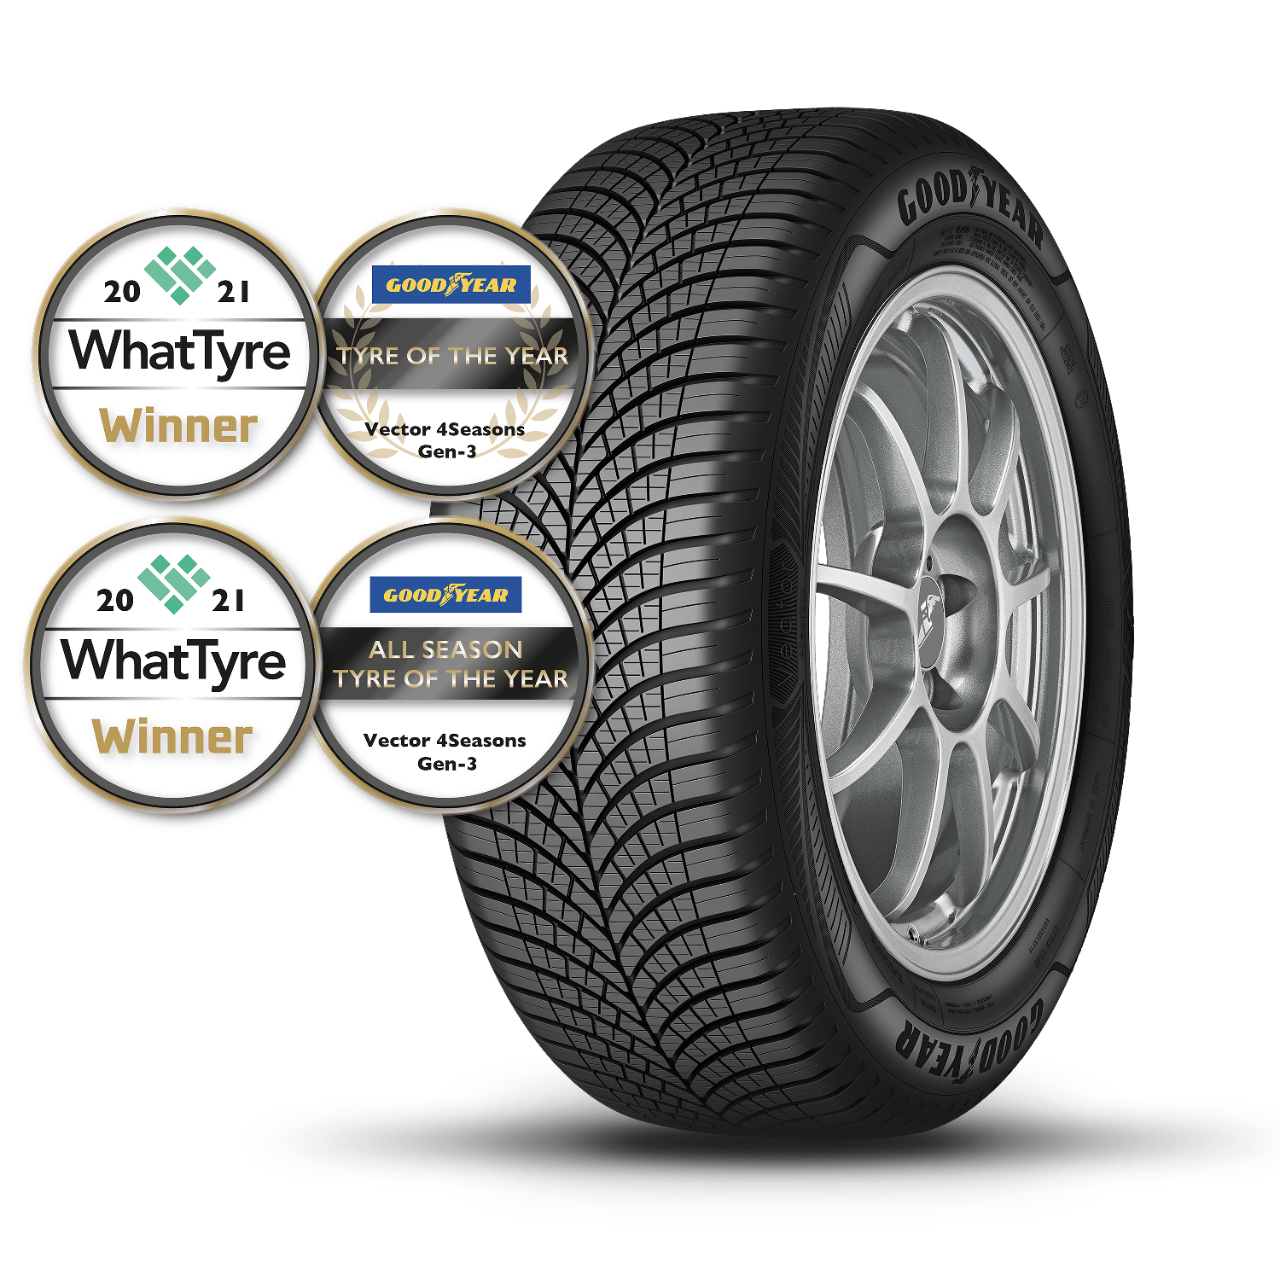 Vector 4Seasons Gen-3 with What Tyre Tyre of the Year 2021 and Winner of All Season Tyre of the Year 2021